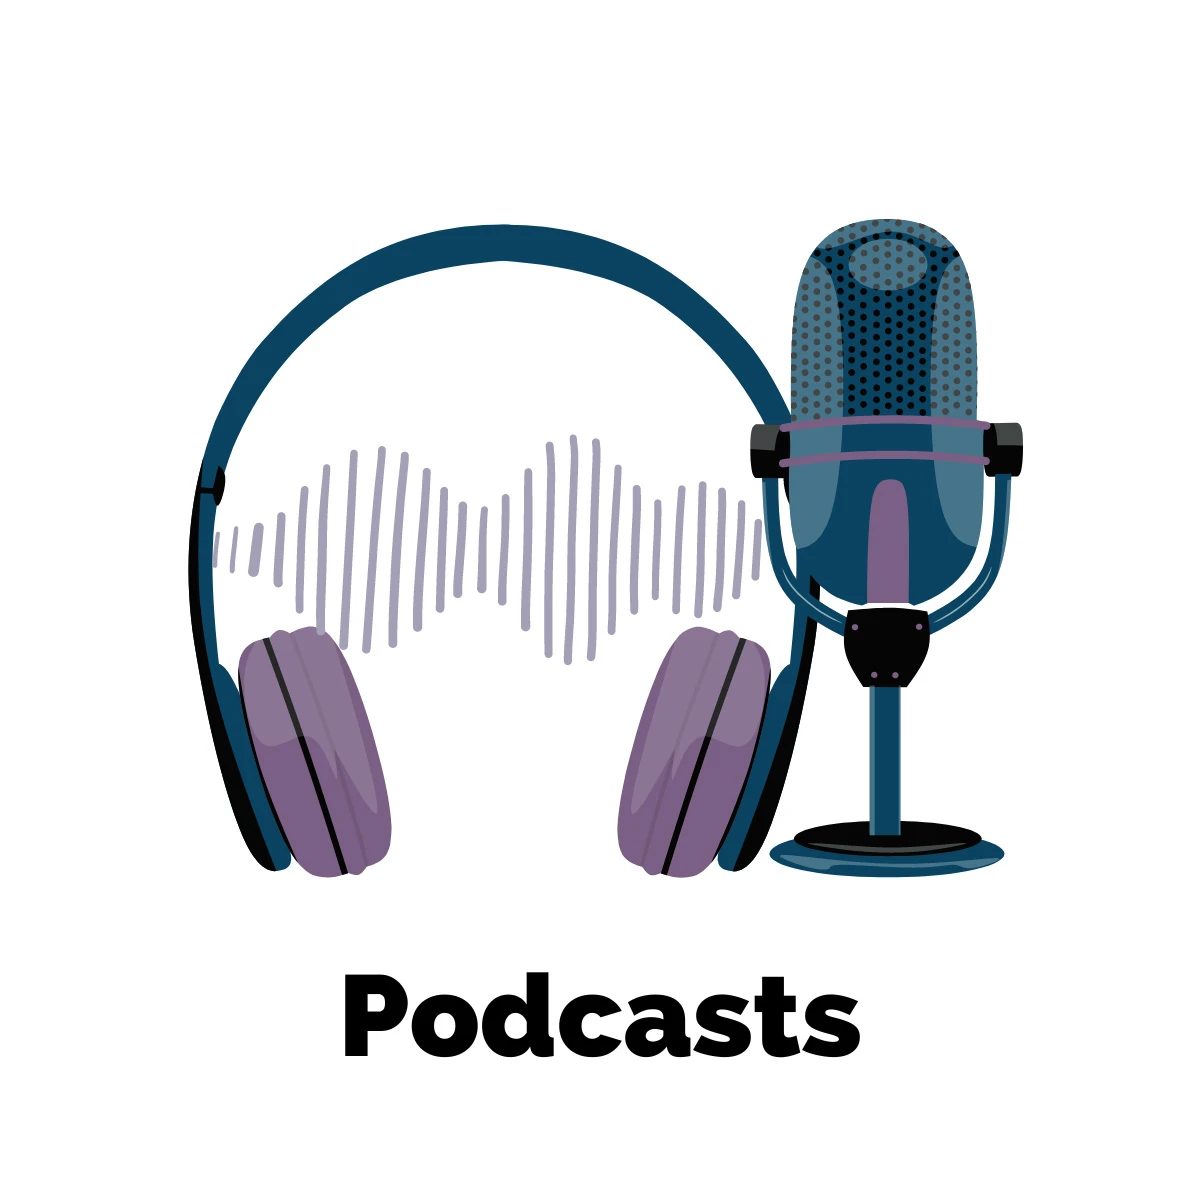 Podcasts On The Uncorked Librarian with graphic of microphone, headphones and digital sound bars in deep blue and purple coloring